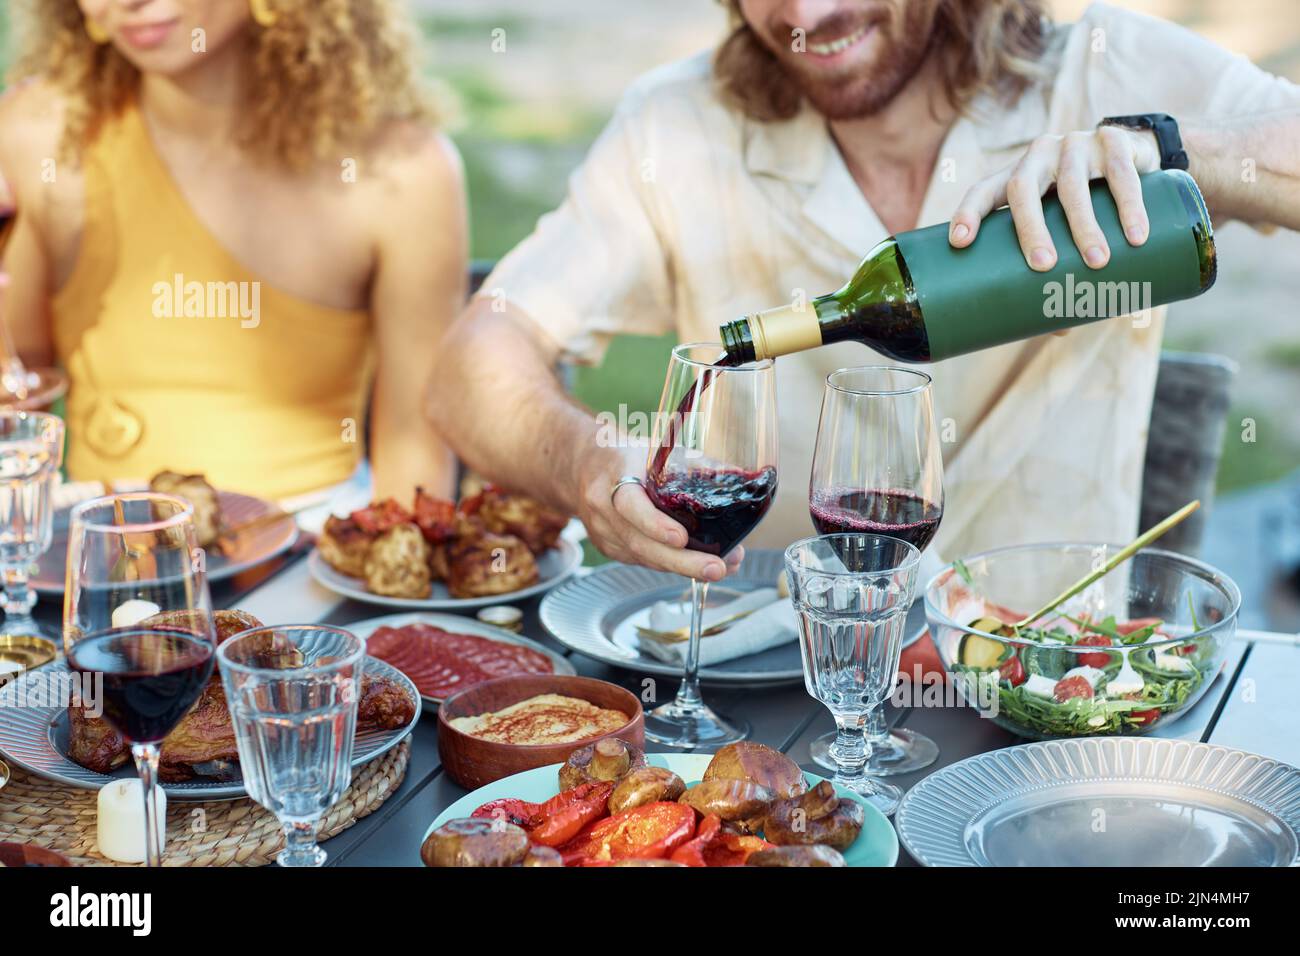 Close up of man pouring red wine into glass while enjoying dinner party with friends outdoors in Summer Stock Photo